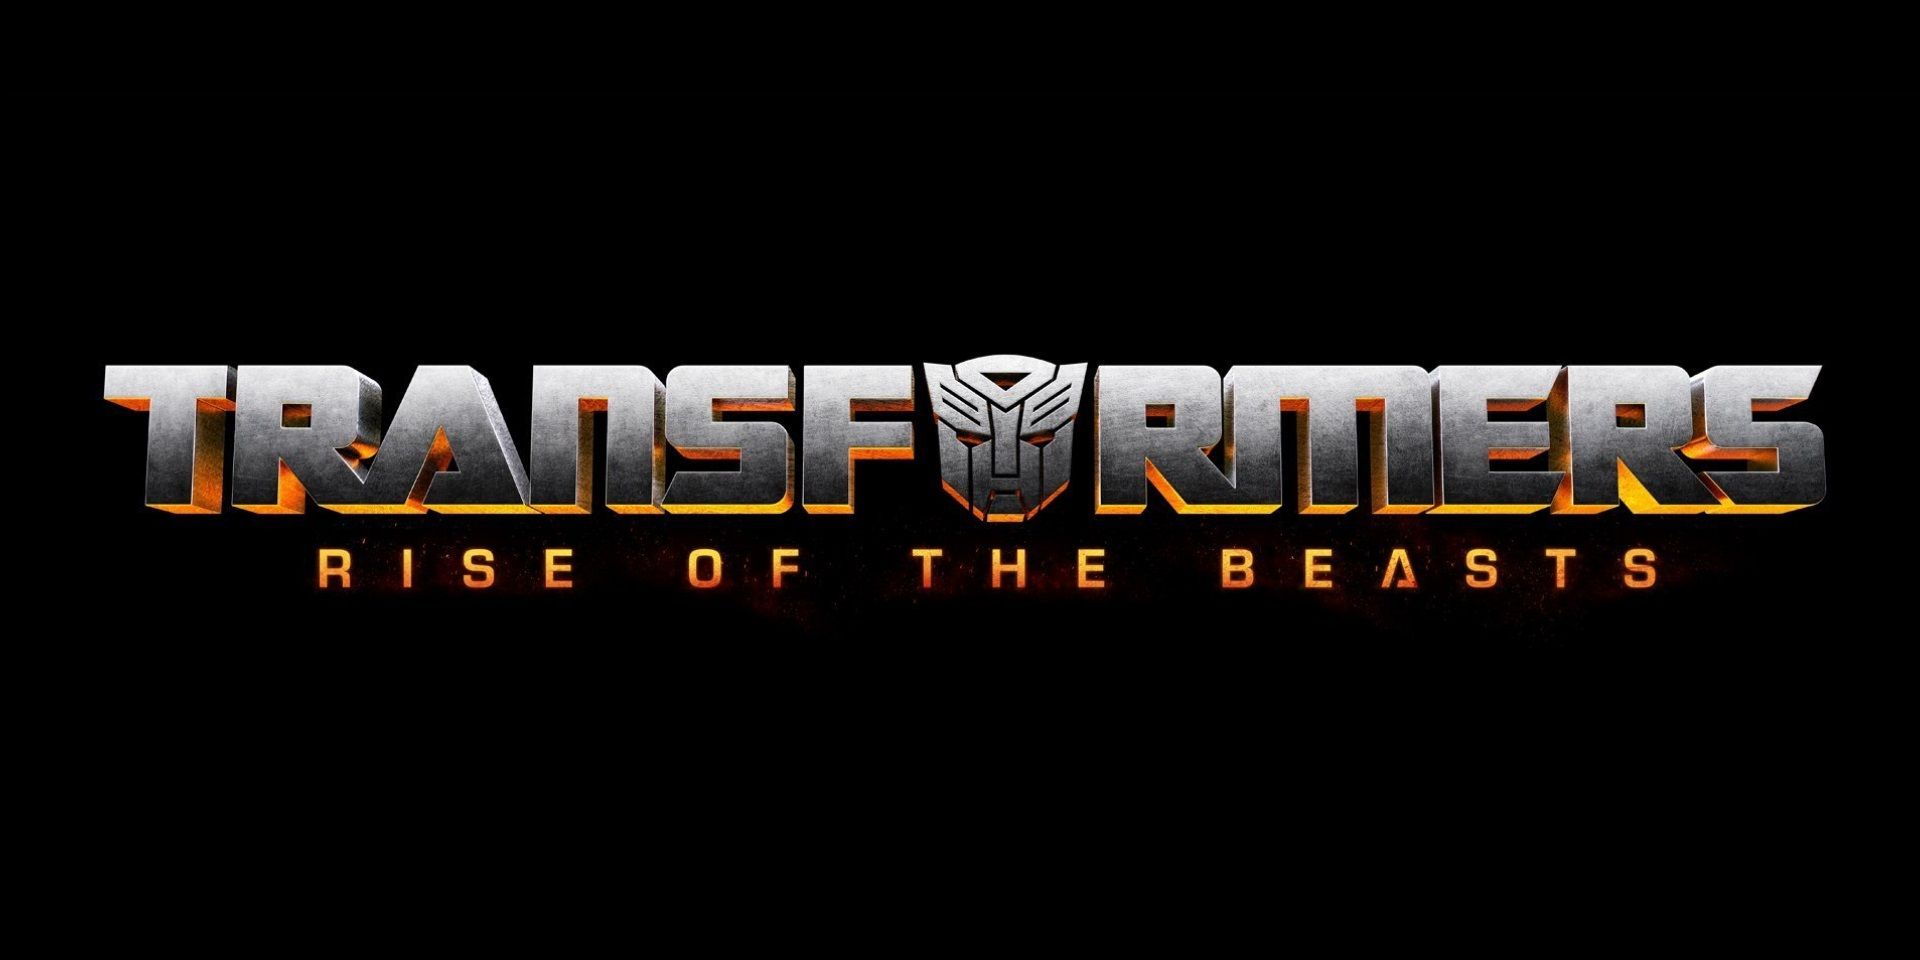 The logo for Transformers Rise of the Beasts